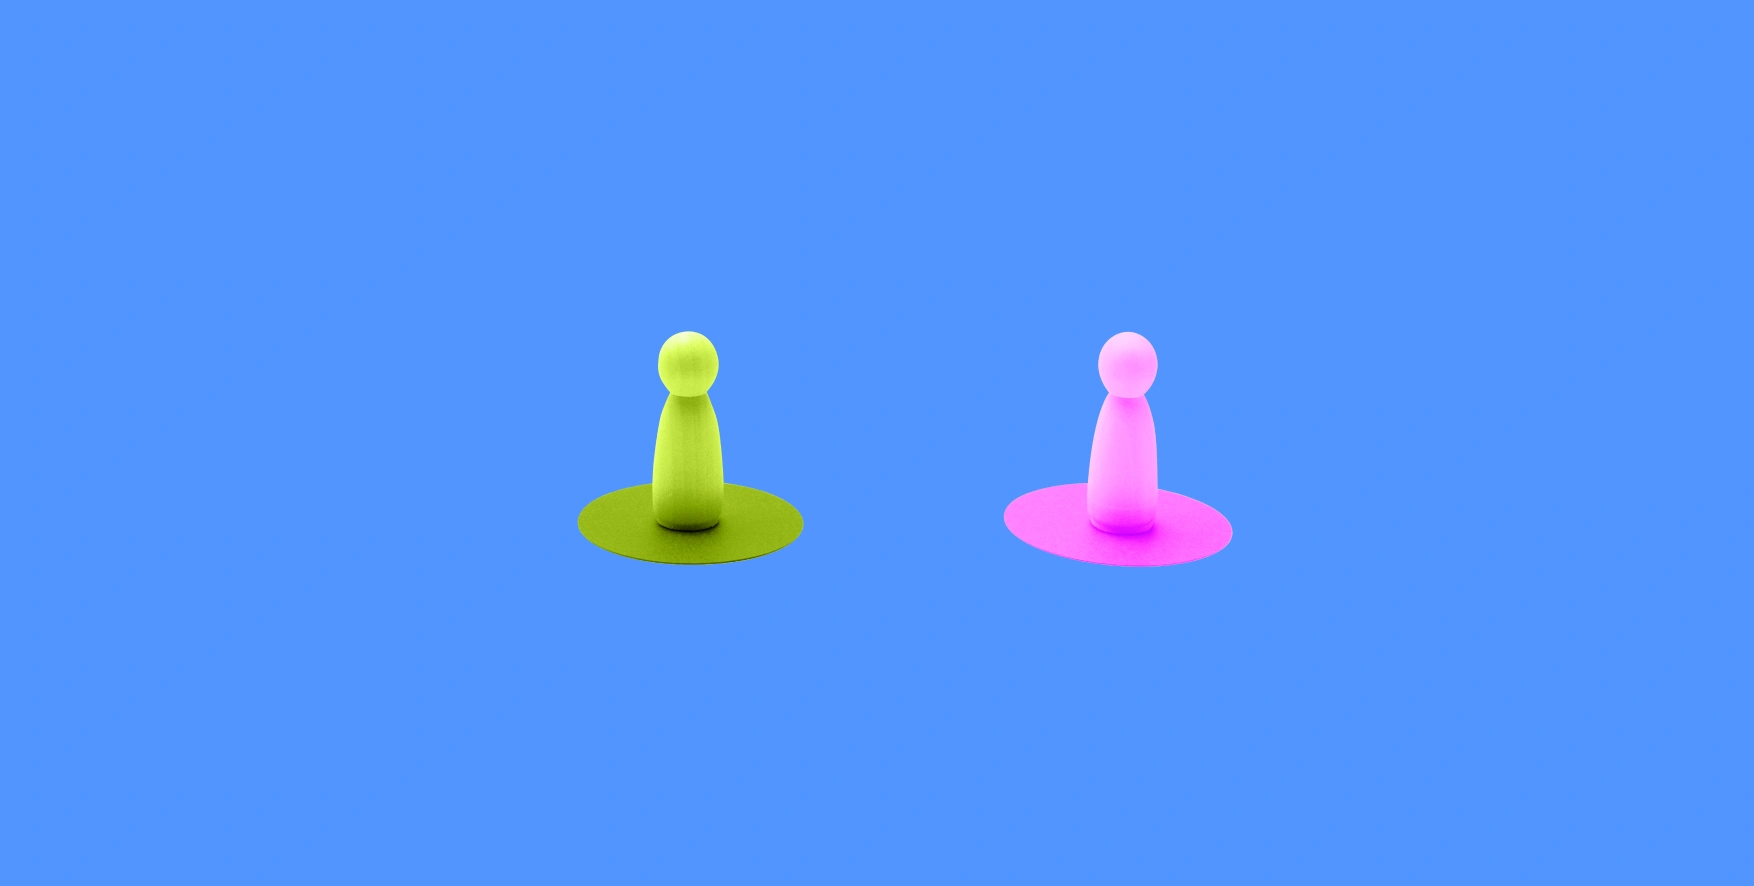 red and blue figurines on blue background